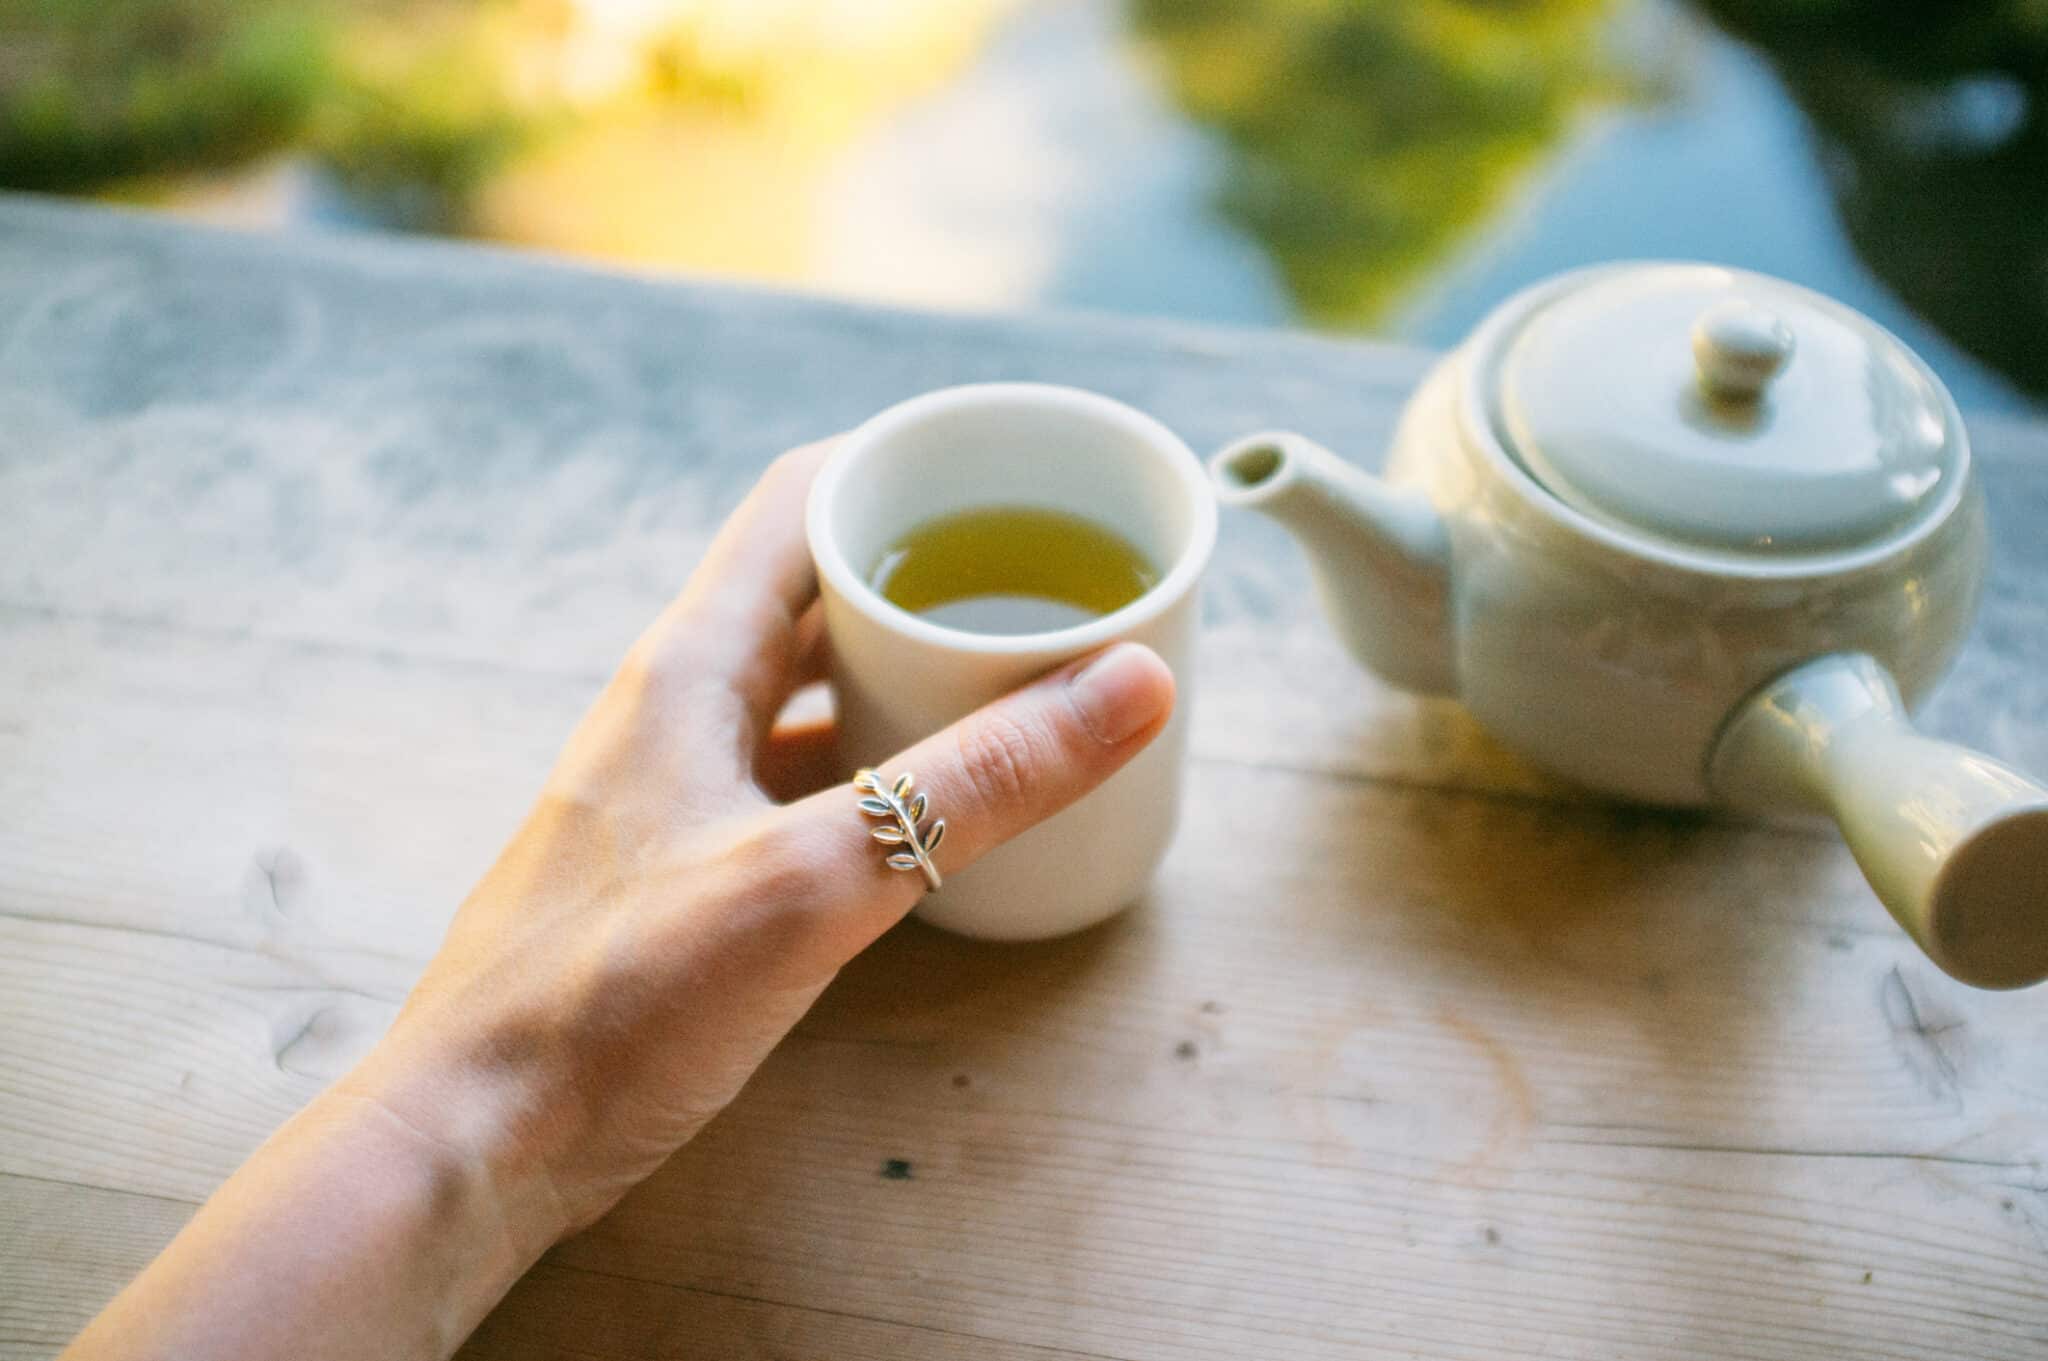 Hand Holding Green Tea Cup By Teapot On Table